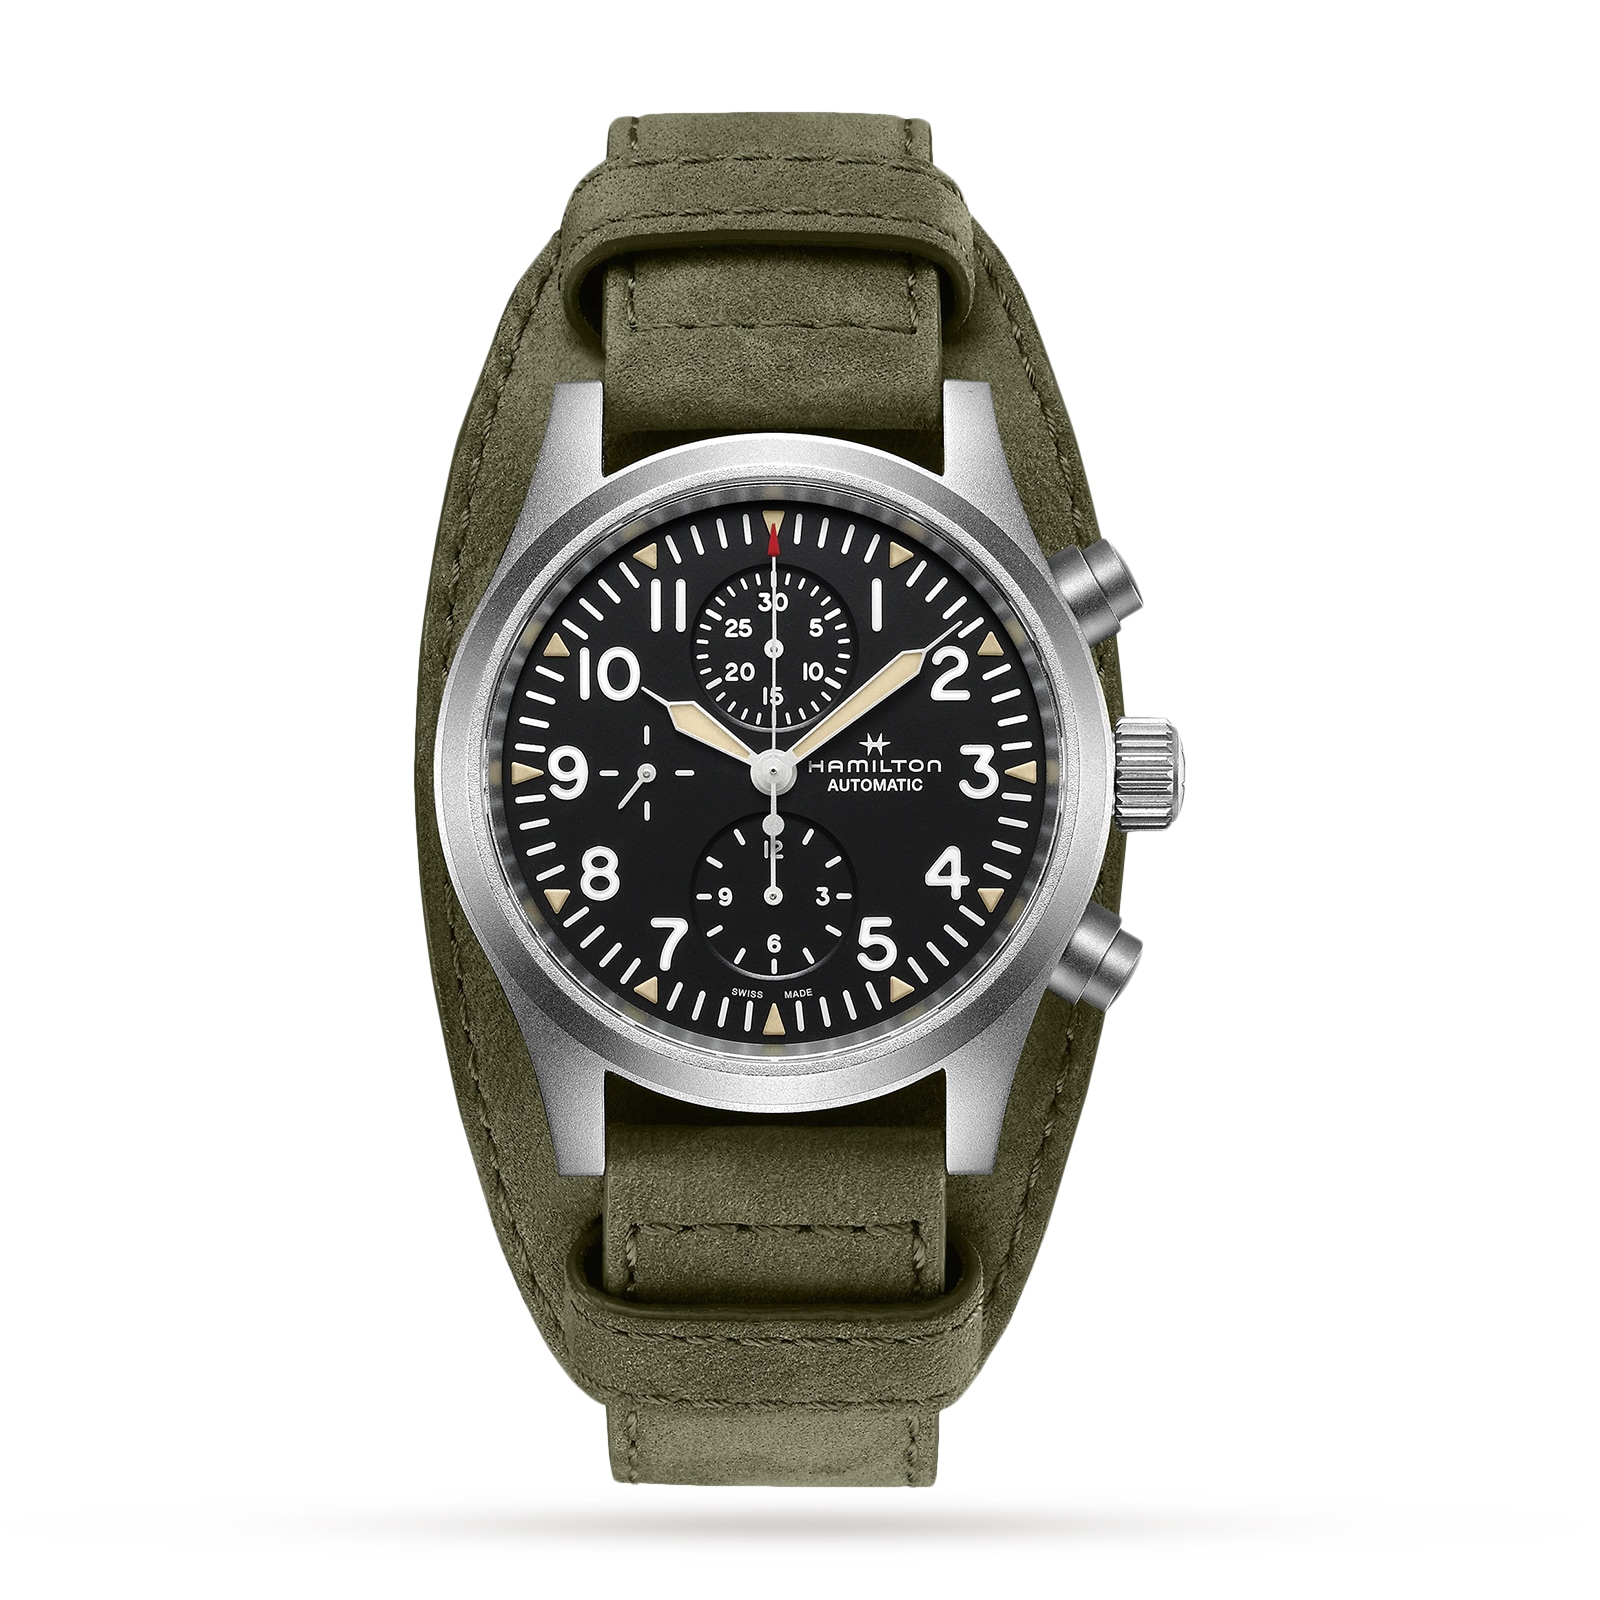 How to operate a Hamilton Automatic Khaki Field Watch - YouTube